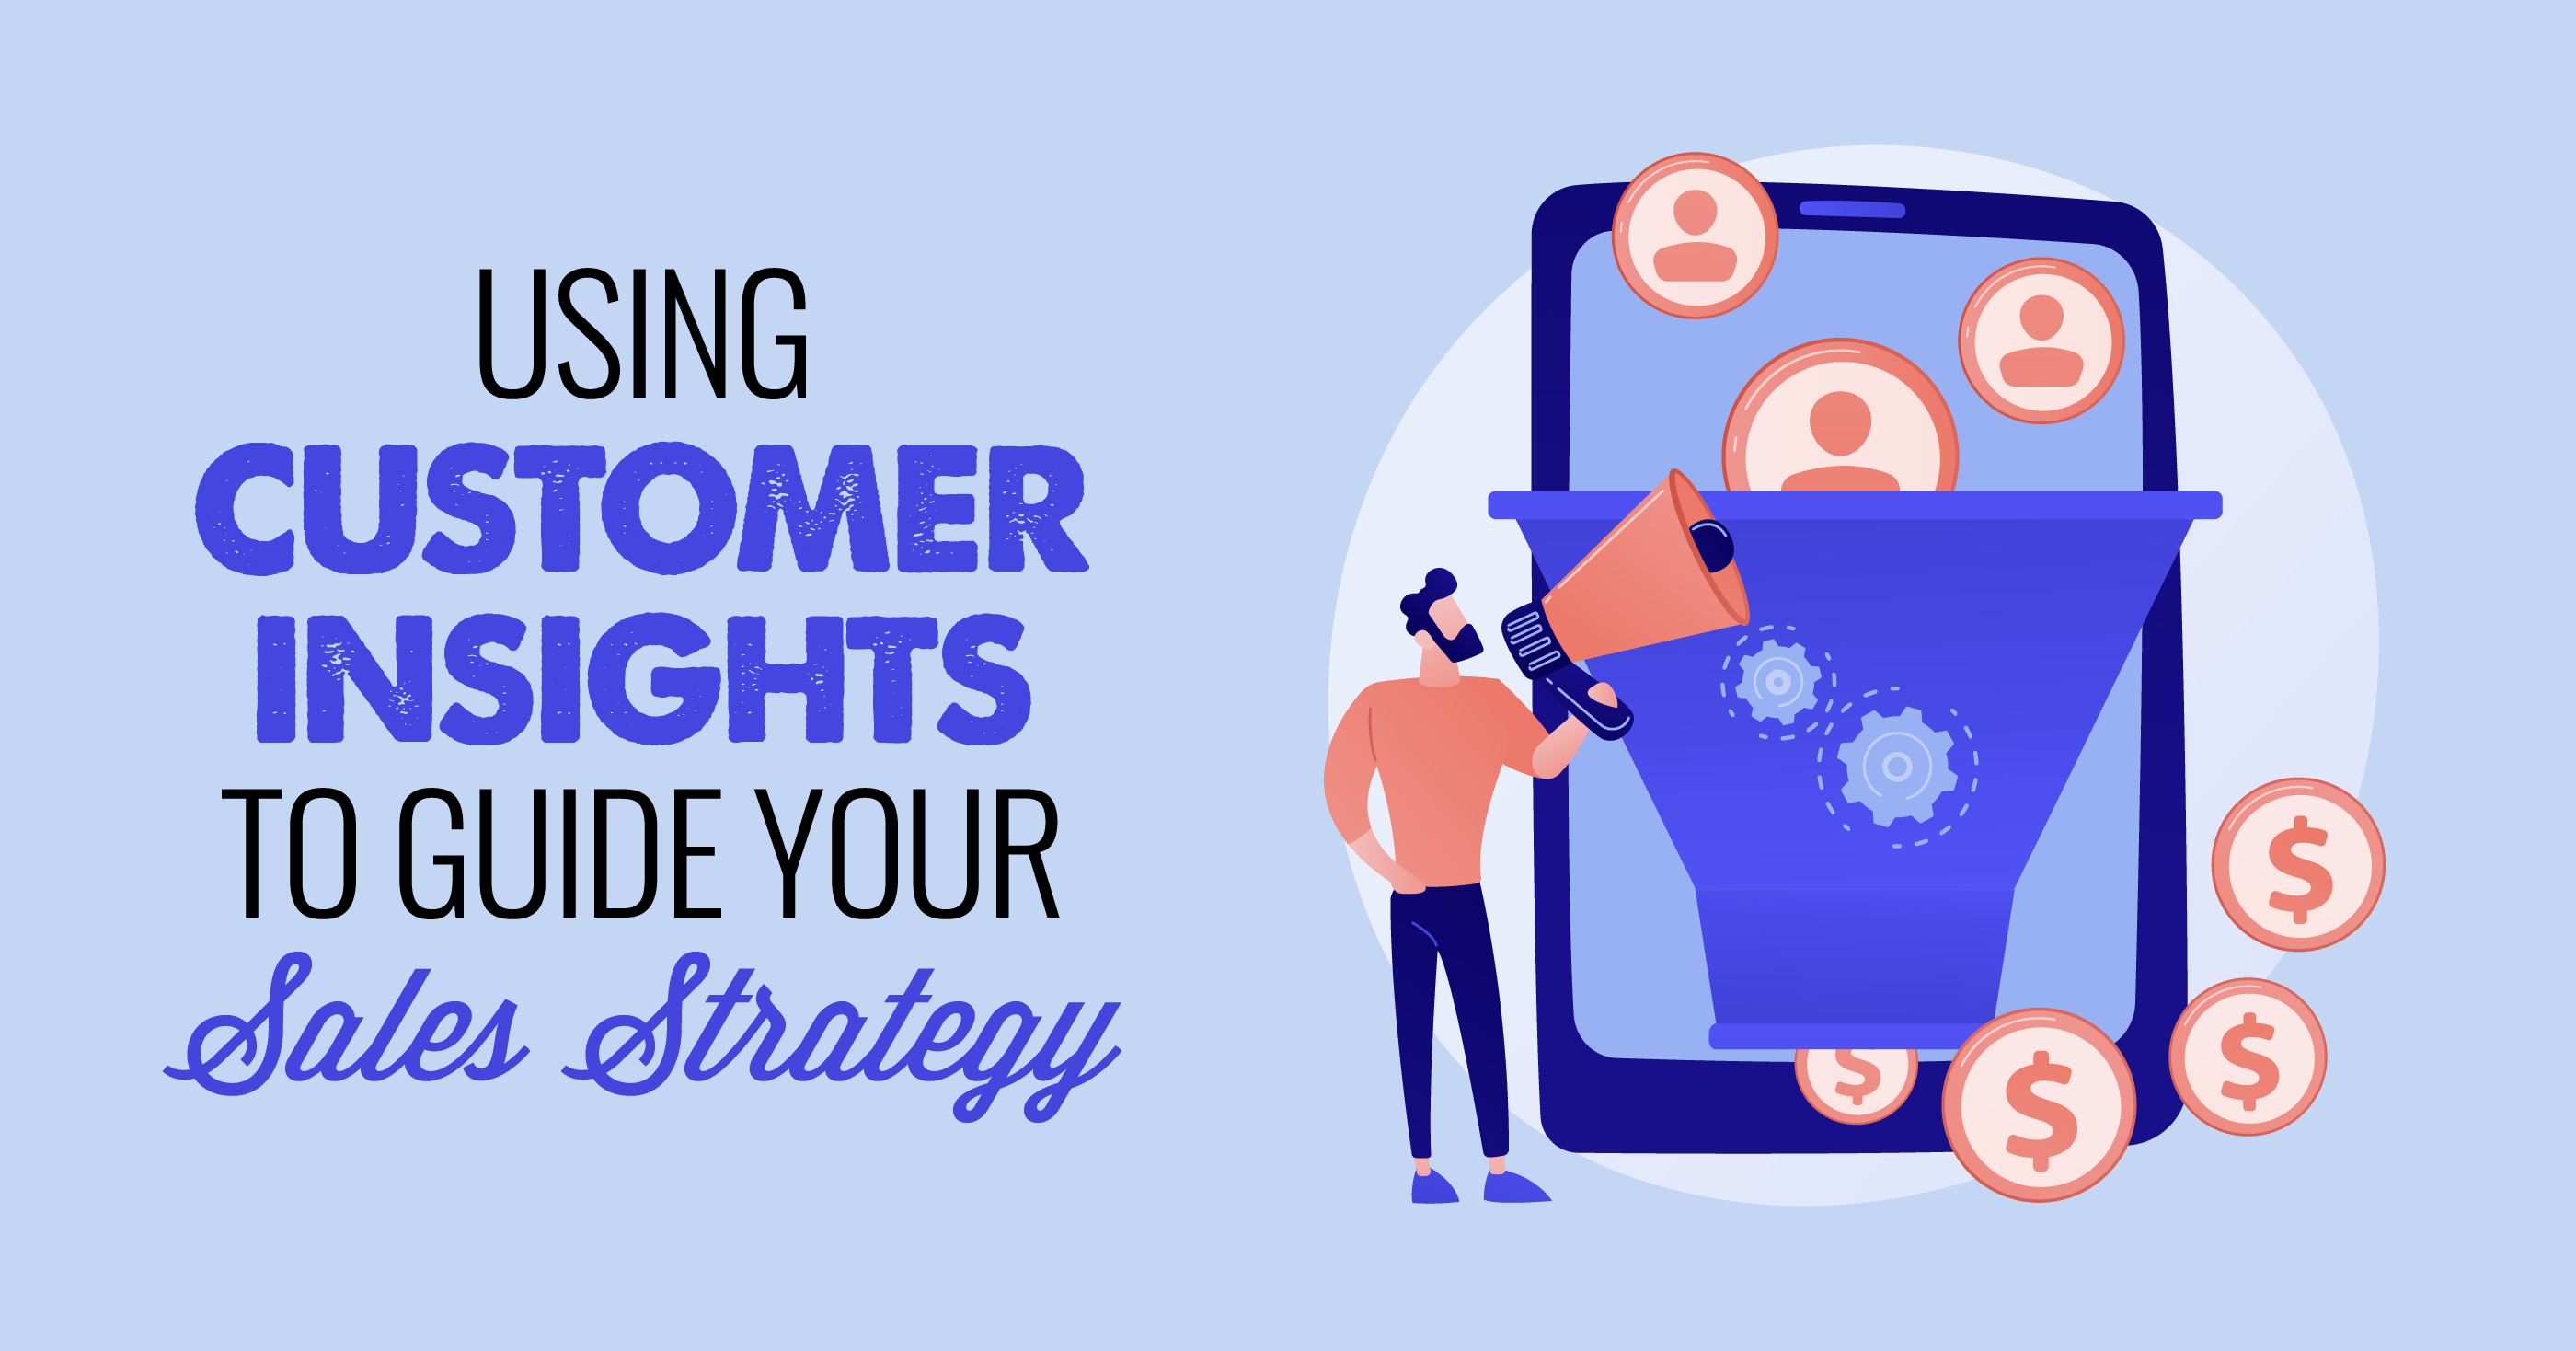 Using customer insights to guide your sales strategy